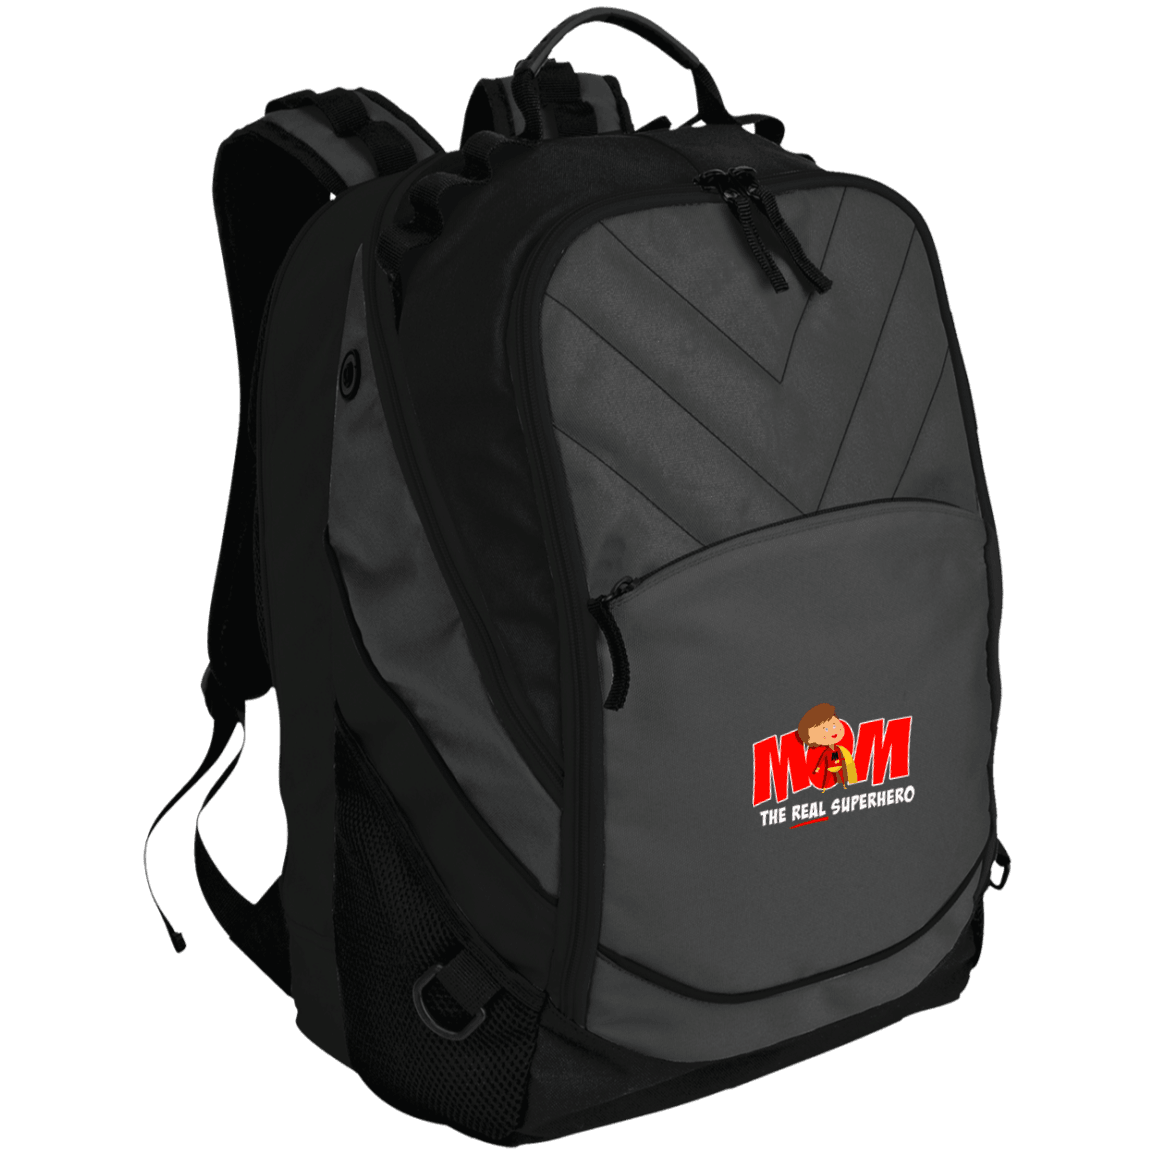 Designs by MyUtopia Shout Out:Mom The Real Superhero Embroidered Embroidered Port Authority Laptop Computer Backpack,Dark Charcoal/Black / One Size,Backpacks